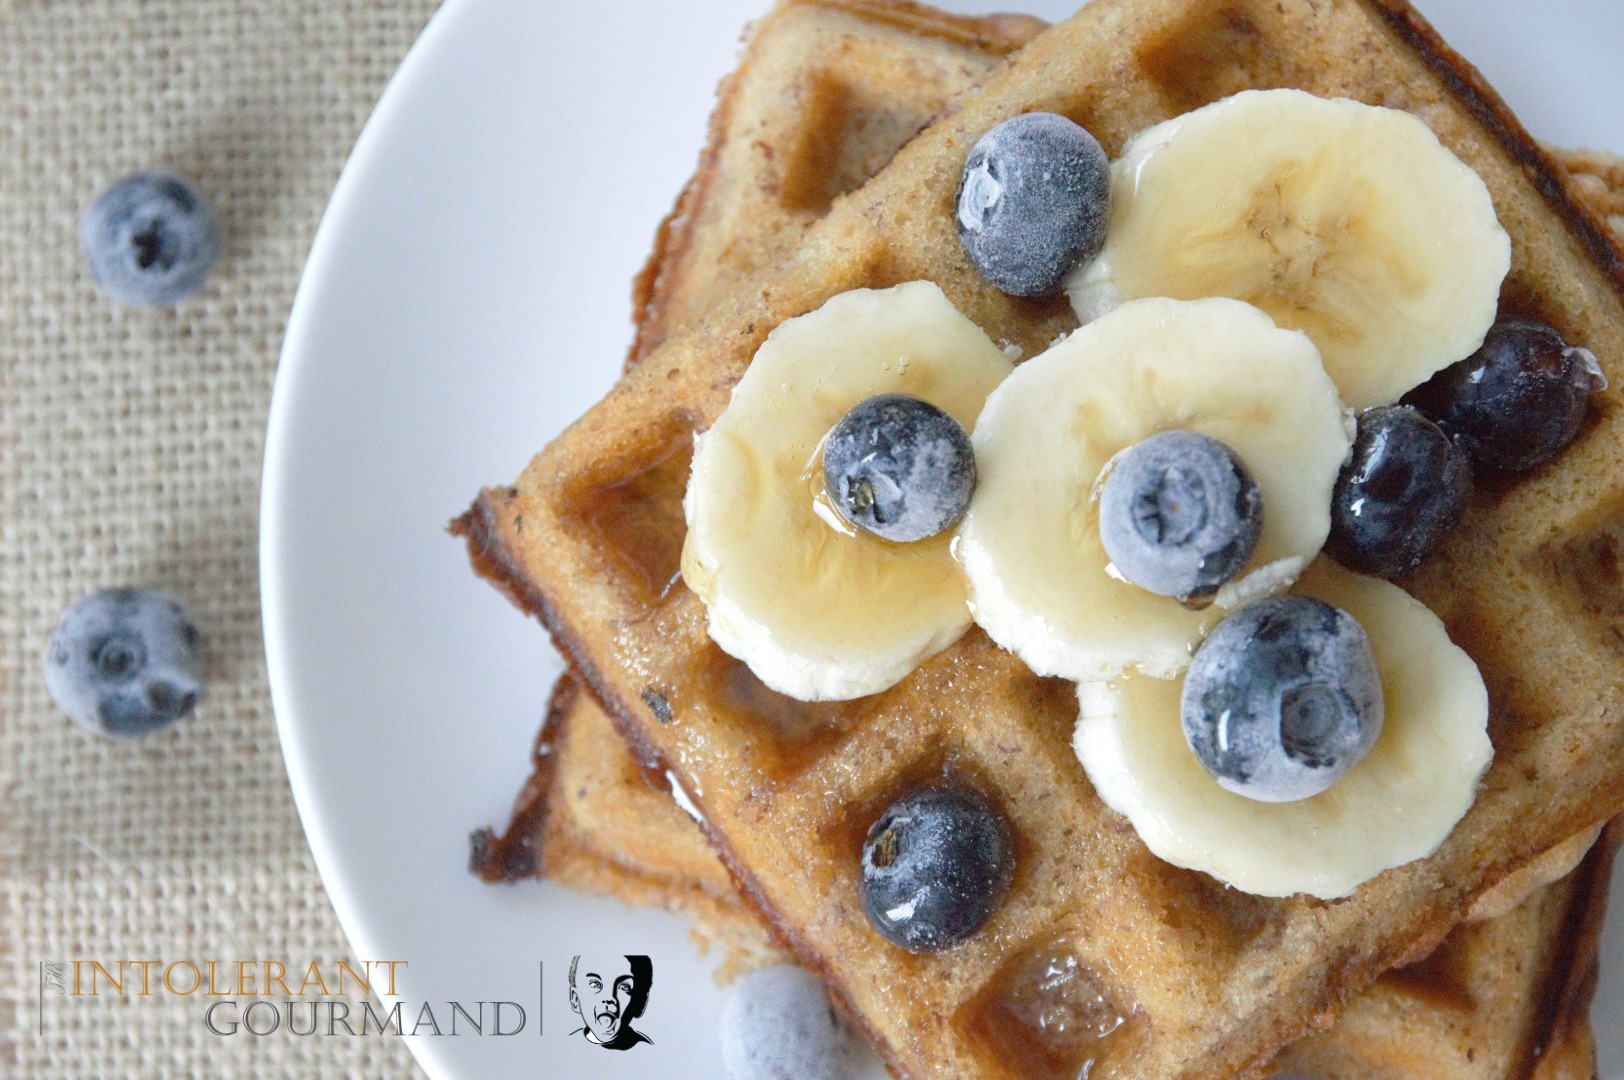 Oaty Waffles - a delicious alternative for breakfast that also happens to be gluten-free! It's simple and quick to make too, making it the perfect breakfast option! www.intolerantgourmand.com